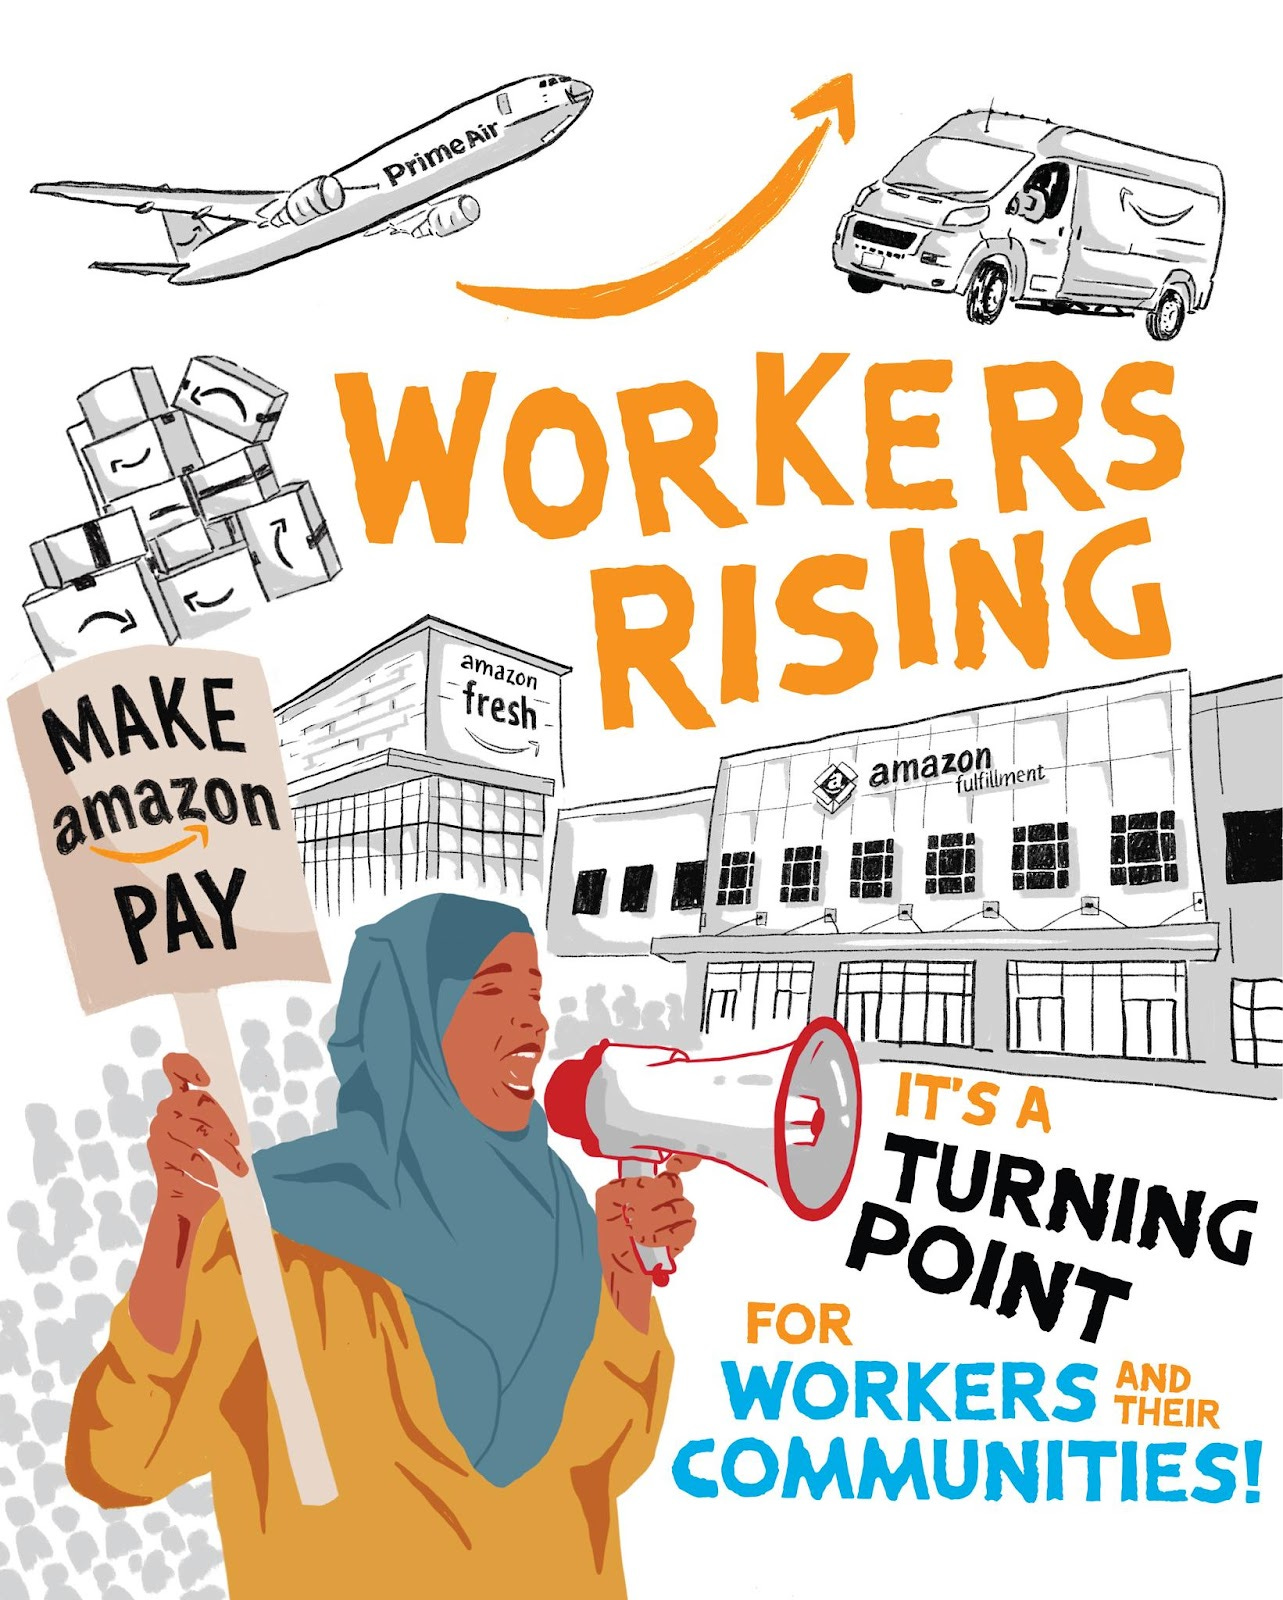 an illustration of a Brown woman wearing a blue hijab and holding a picket sign and megaphone, a grey crowd of people behind and text that says 'WORKERS RISING MAKE amazon PAY IT'S A TURNING POINT FOR WORKERS AND THEIR COMMUNITIES!'